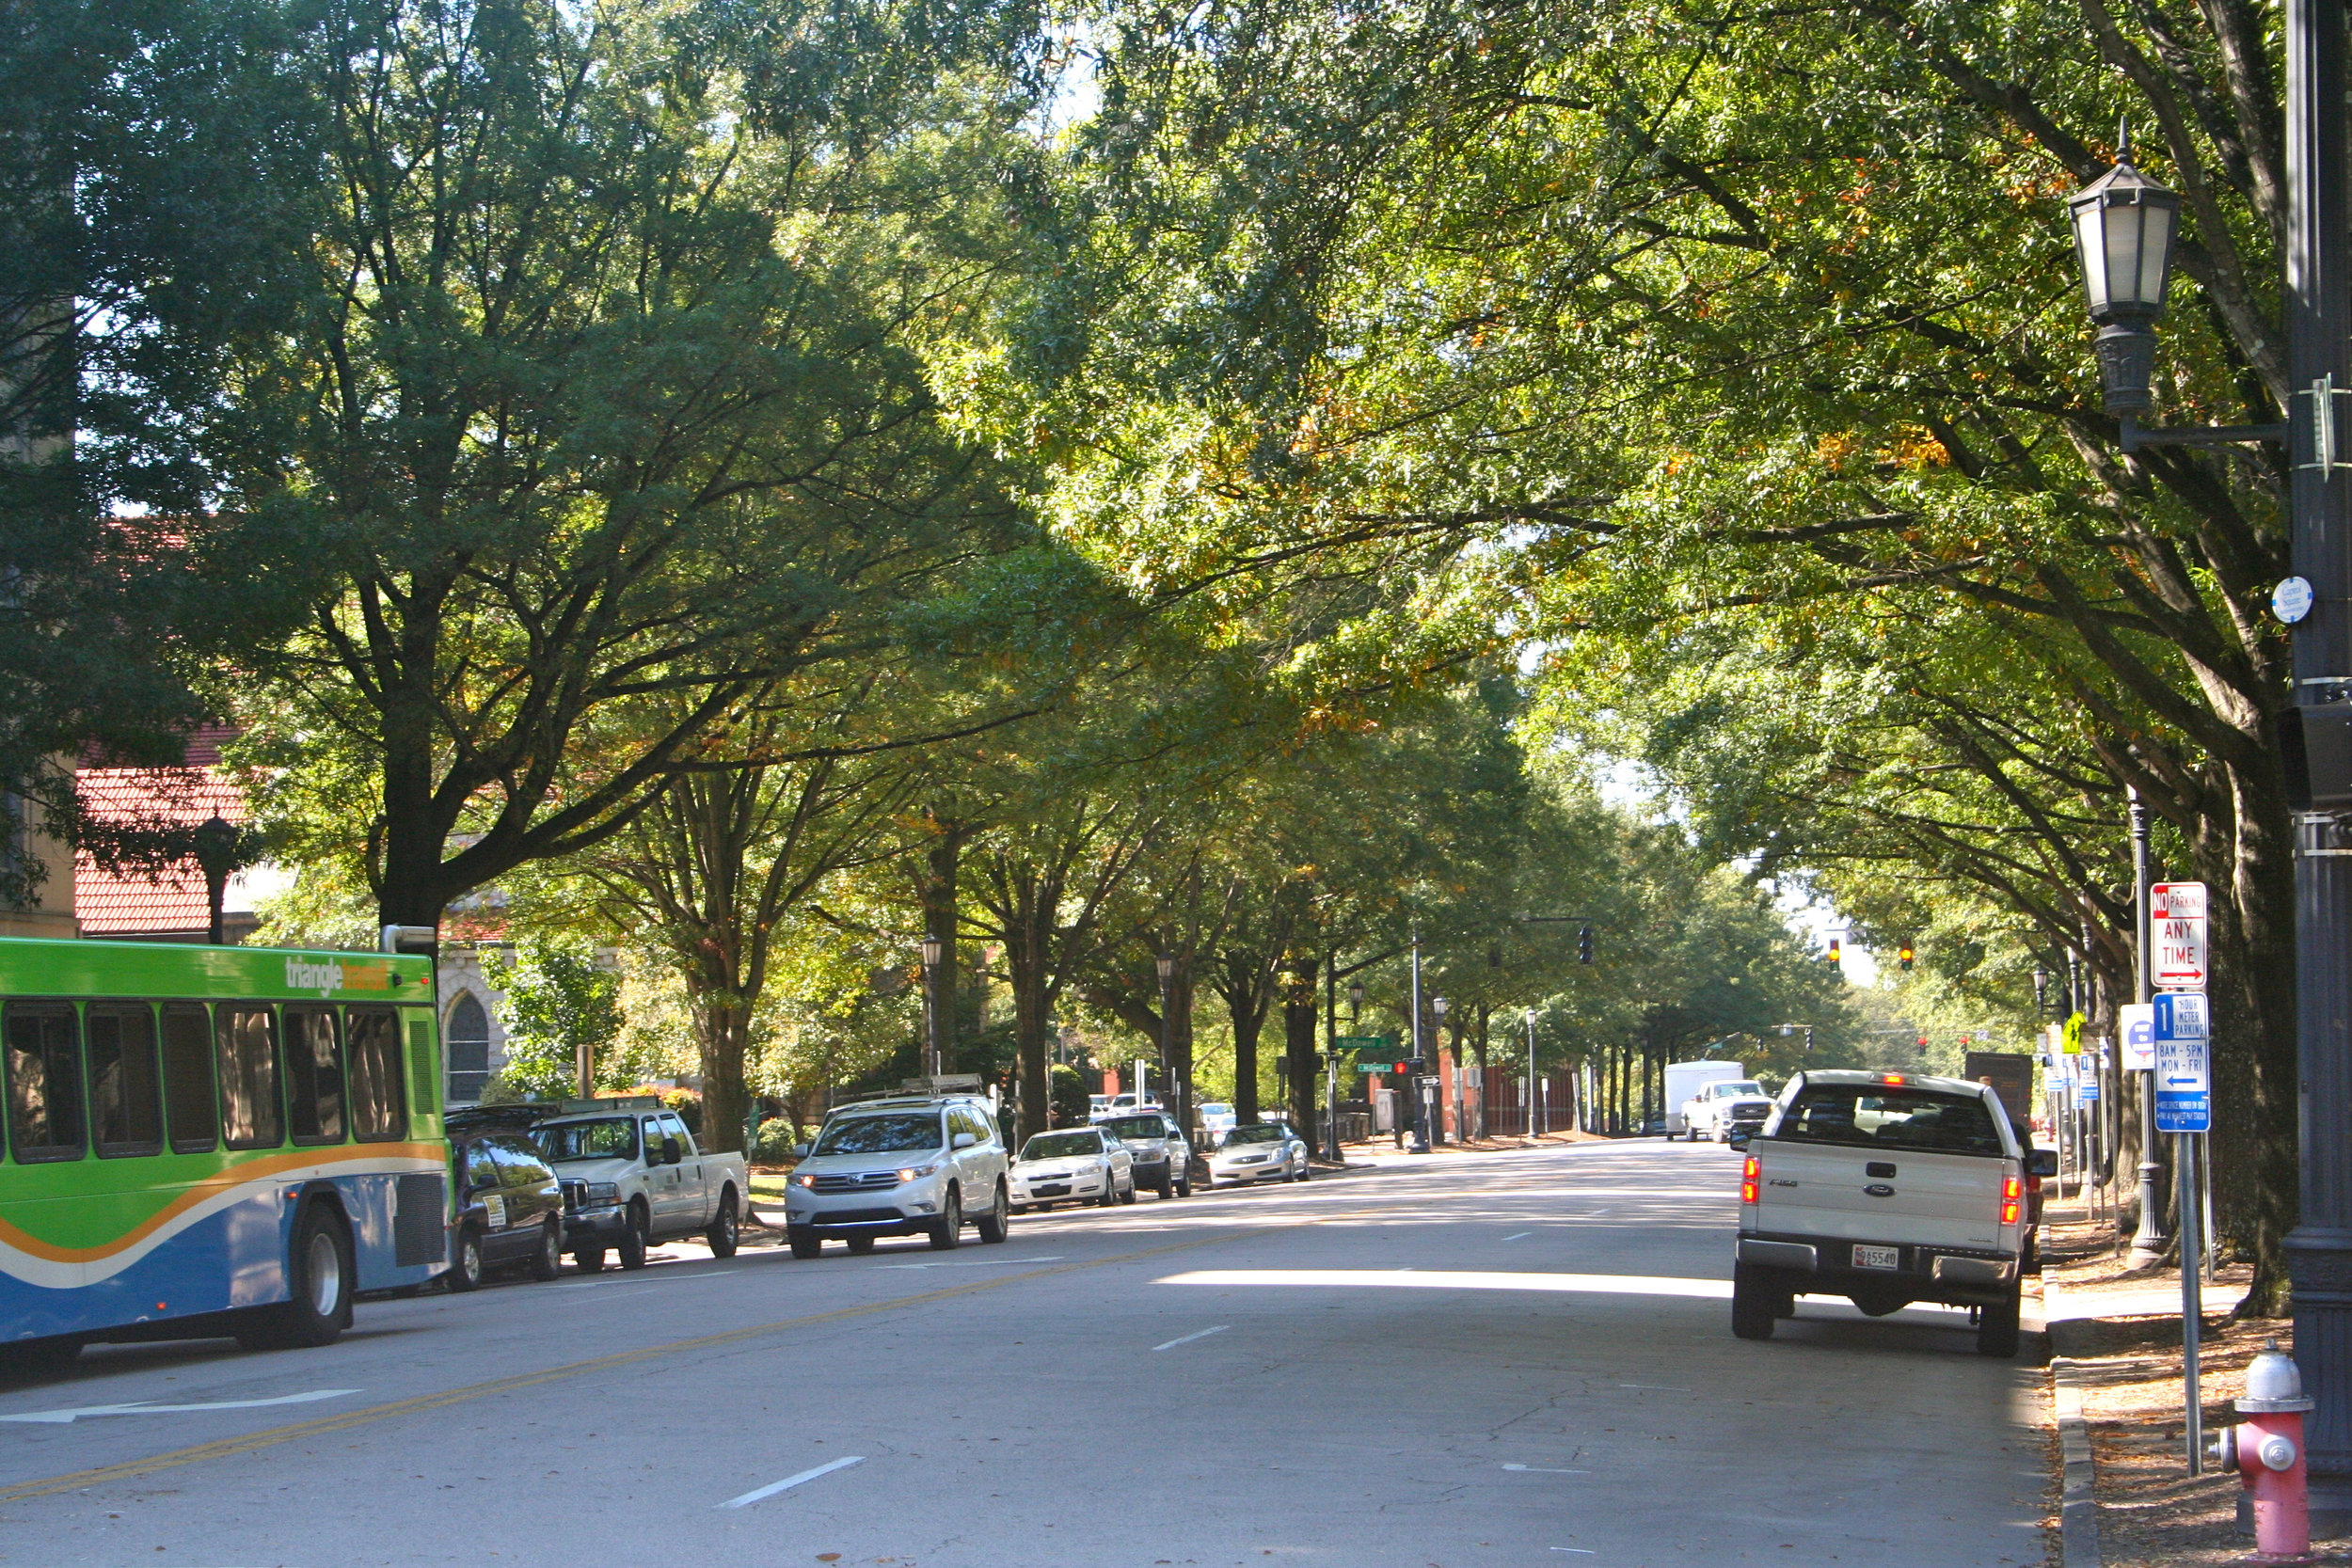 A typical street in Raleigh, NC where this research took place